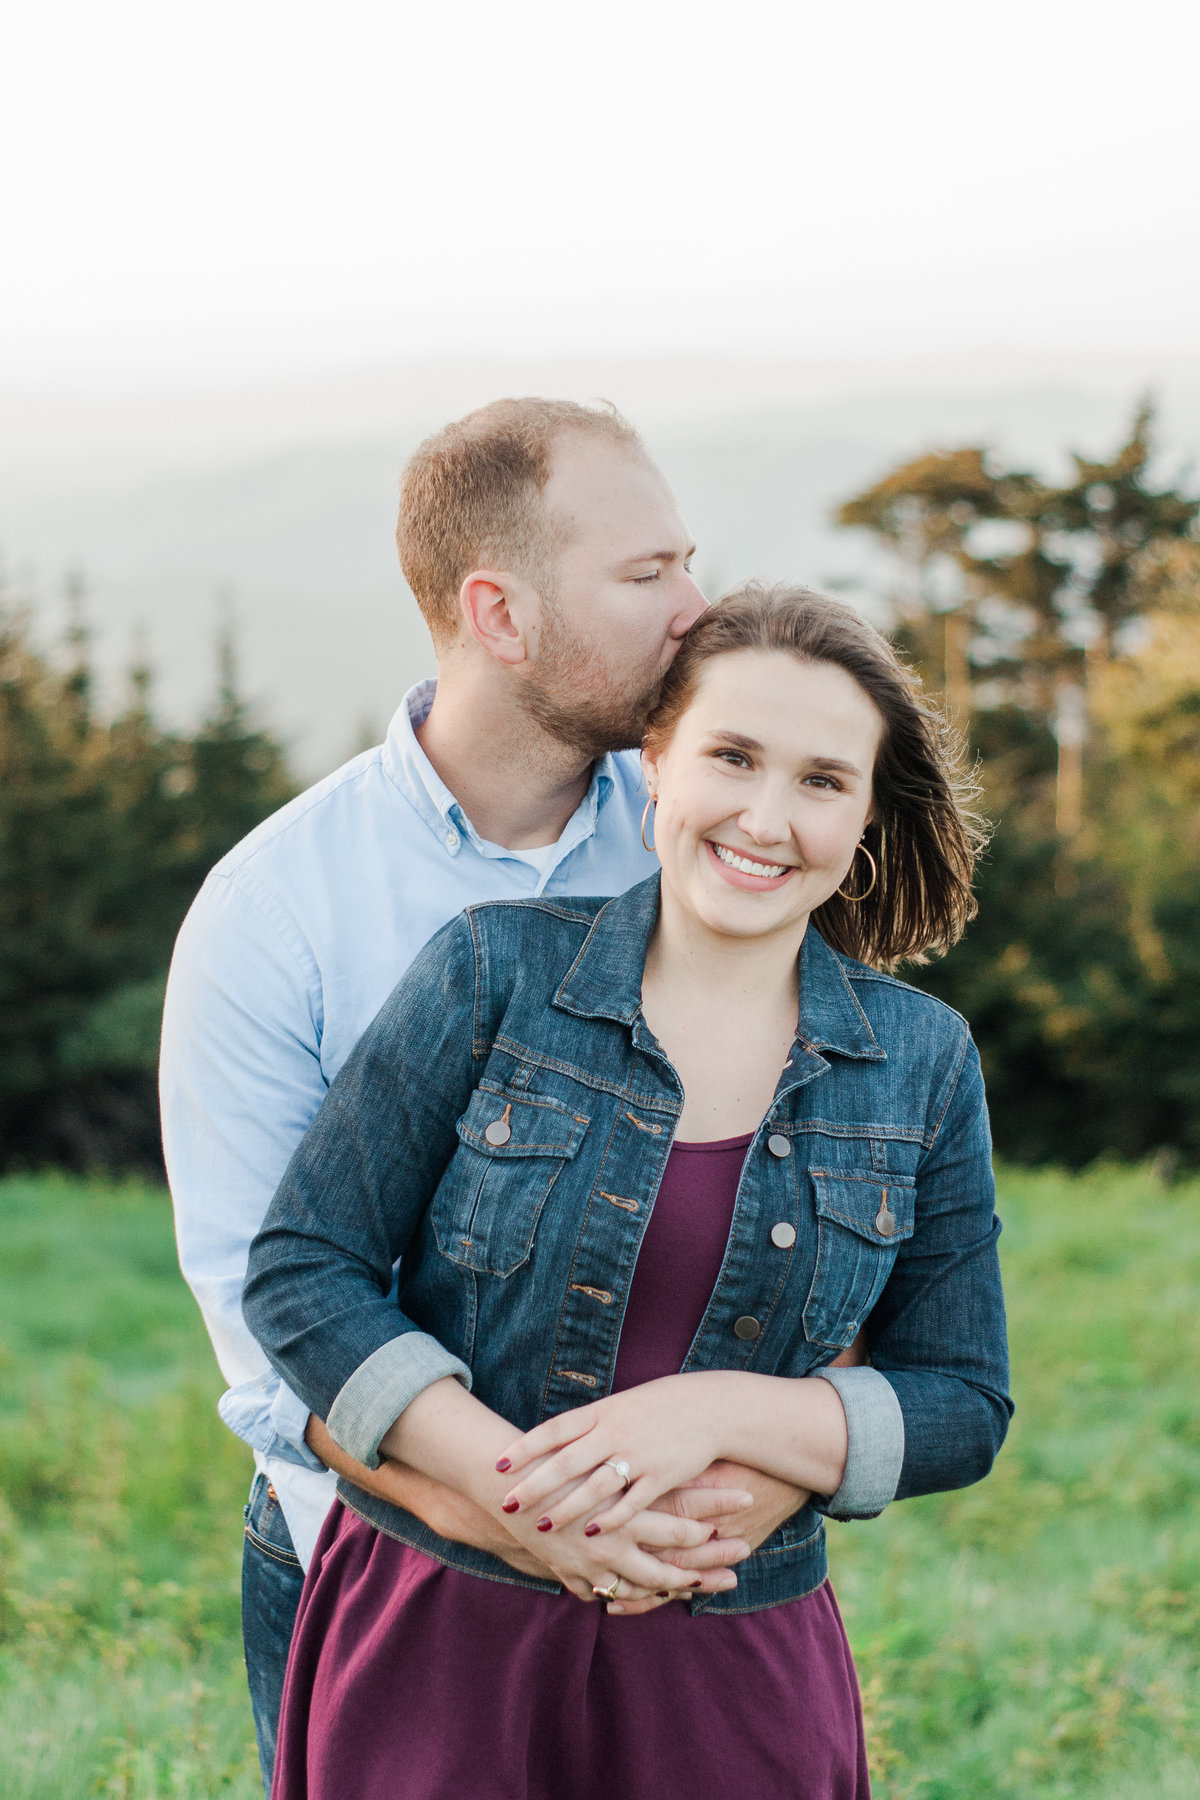 Adventurous engagement photographed at Roan Mountain by Boone Photographer Wayfaring Wanderer.